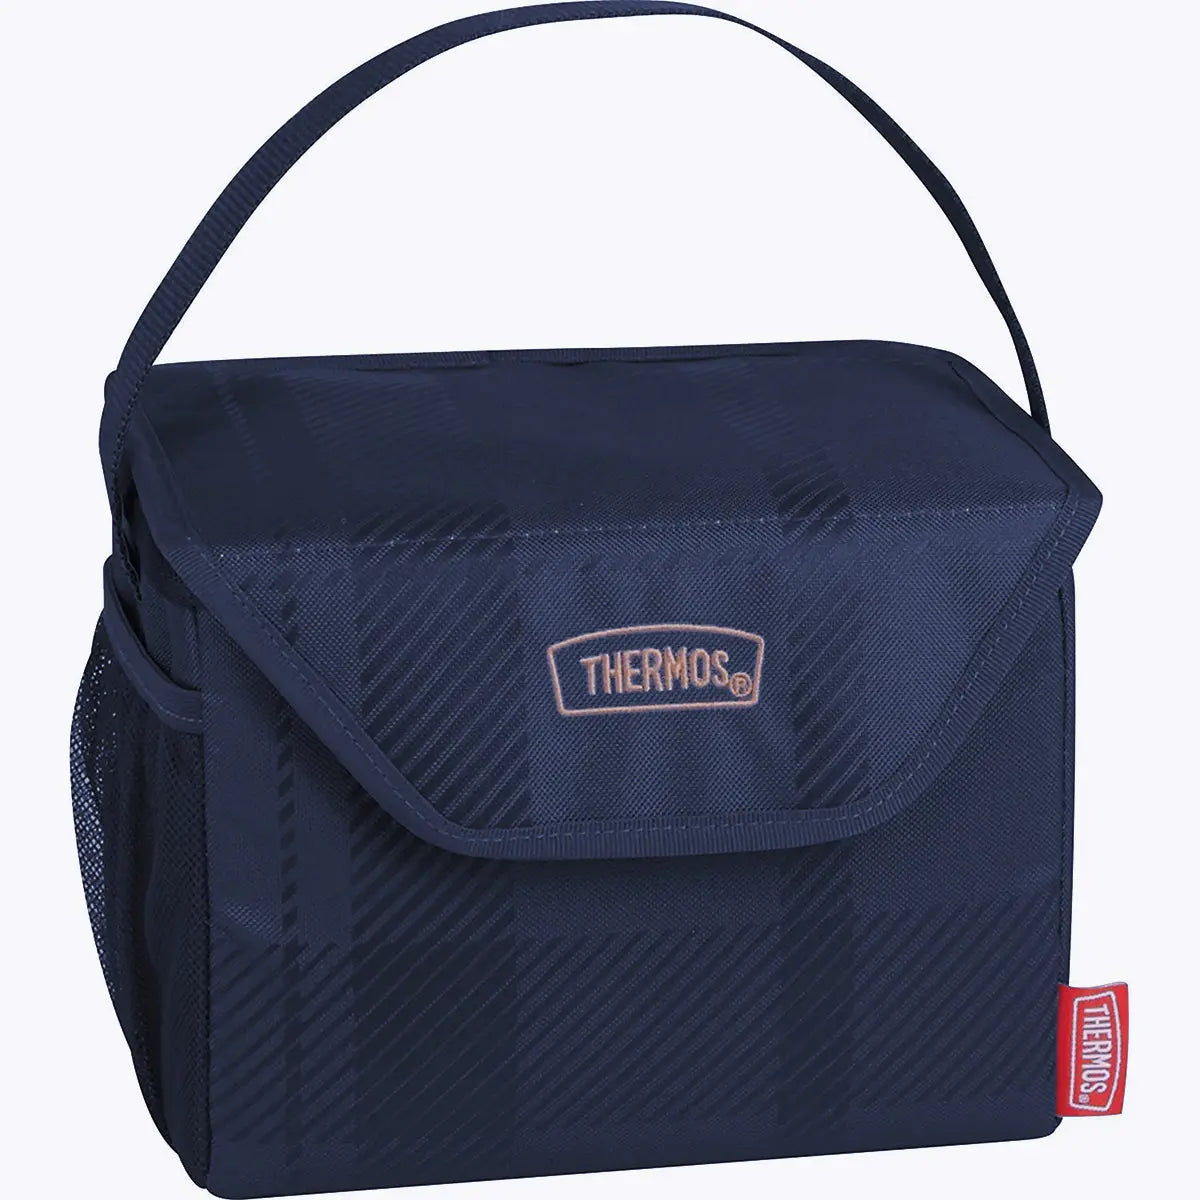 Thermos 6-Can Soft Cooler - Navy Plaid Thermos